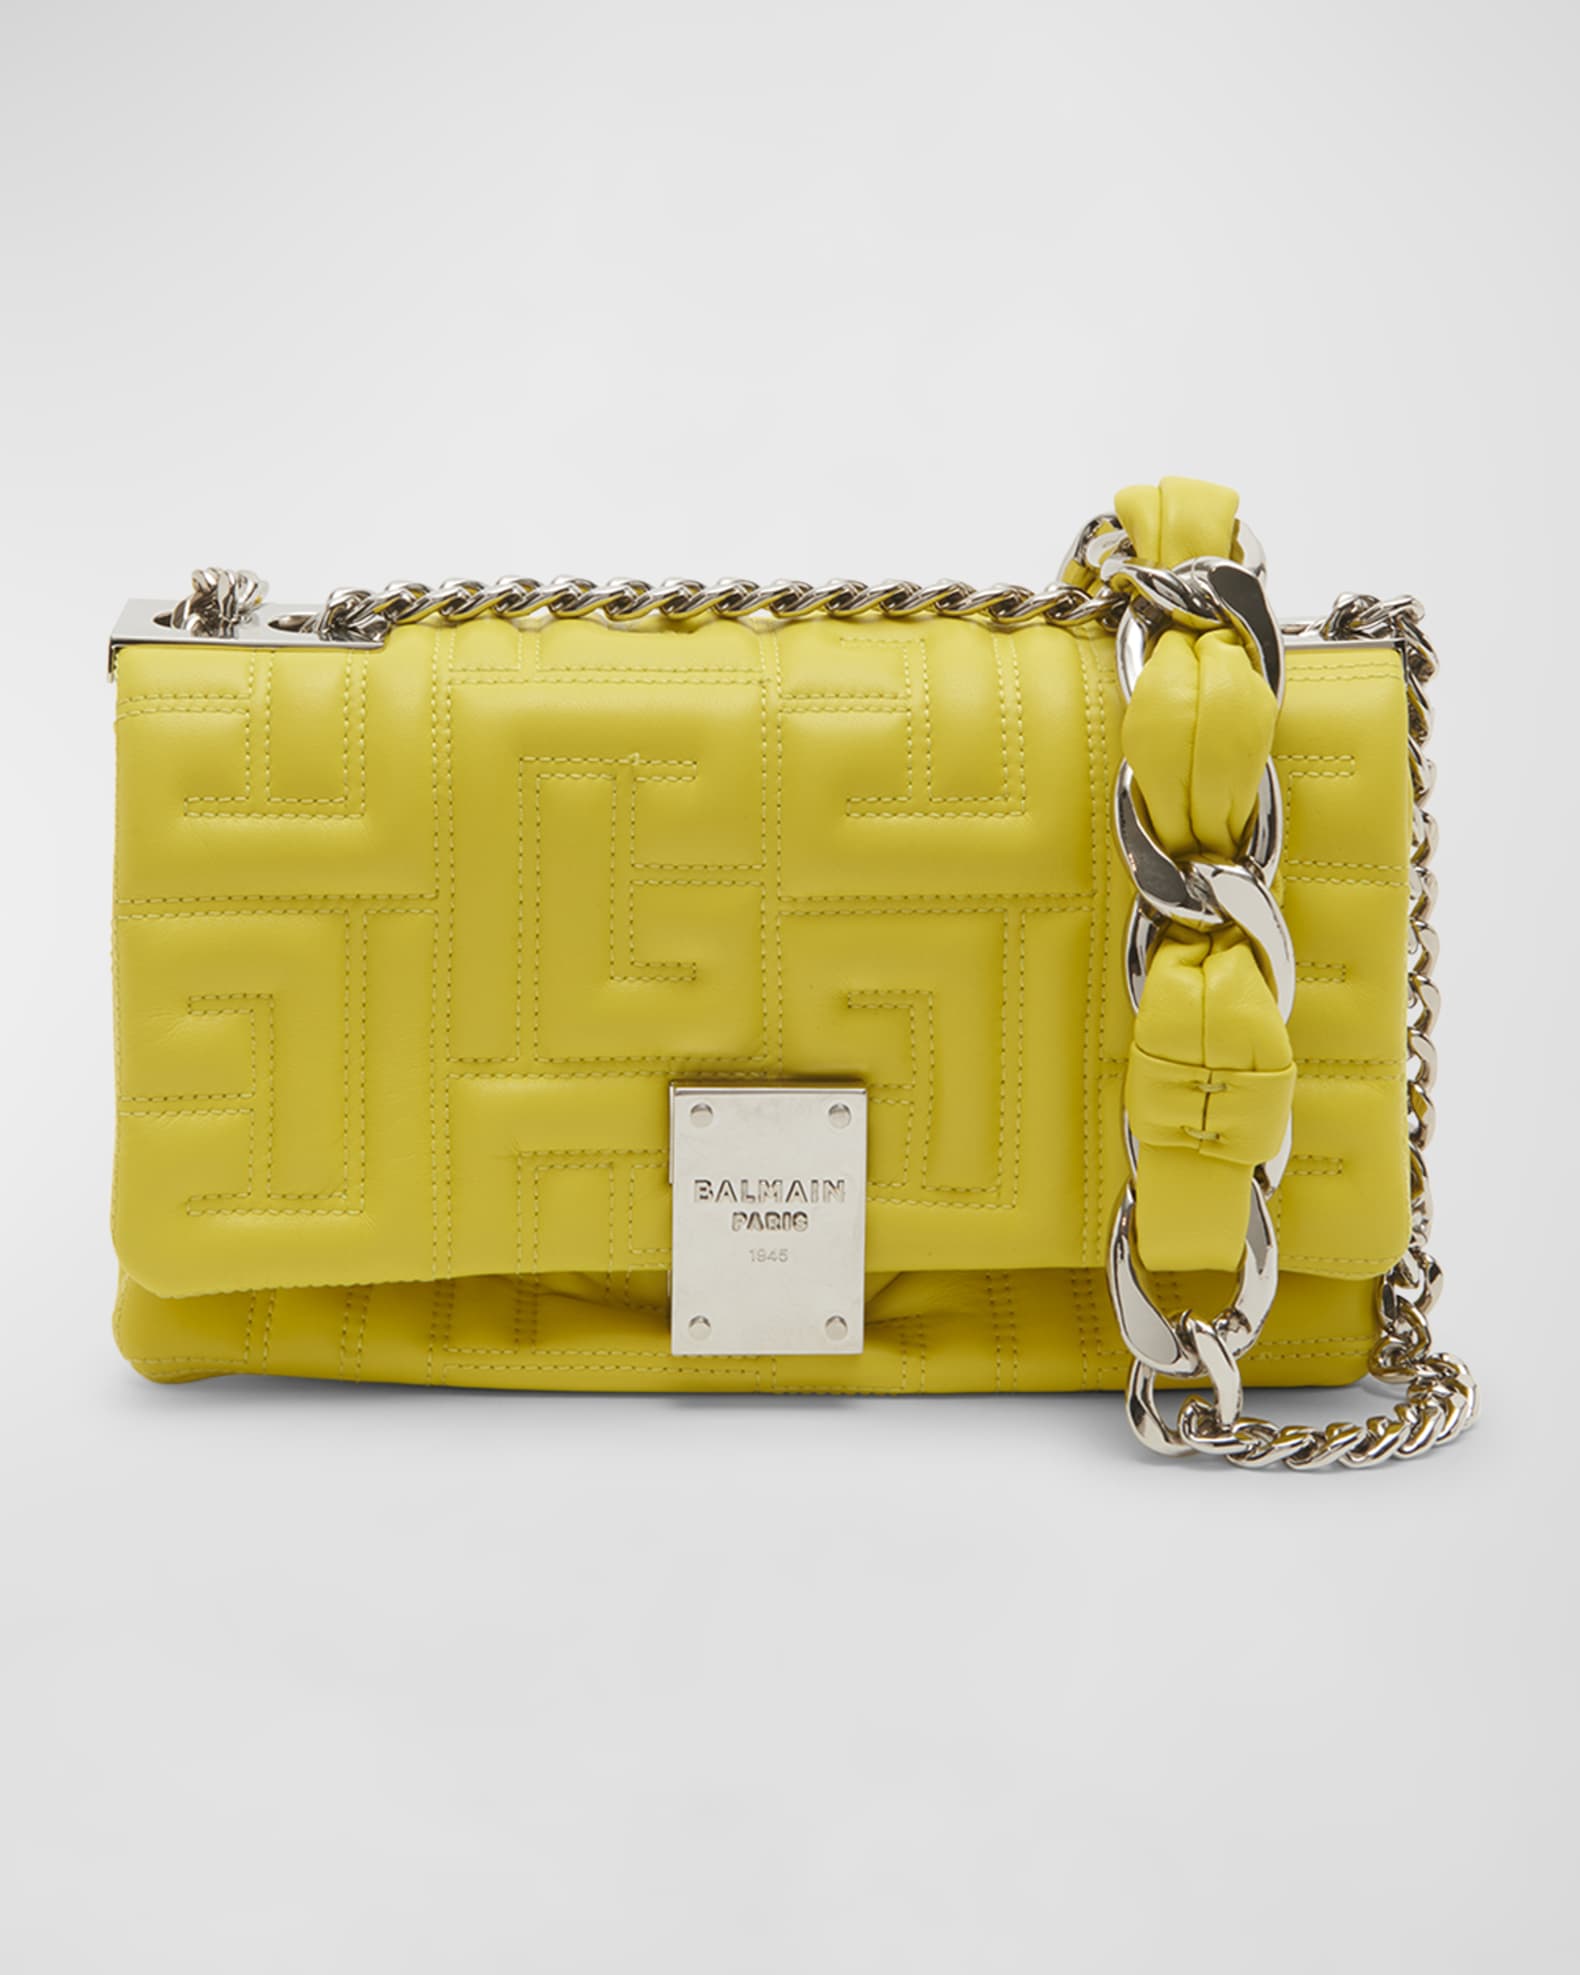 Balmain 1945 Small Quilted Monogram Leather Shoulder Bag | Neiman Marcus